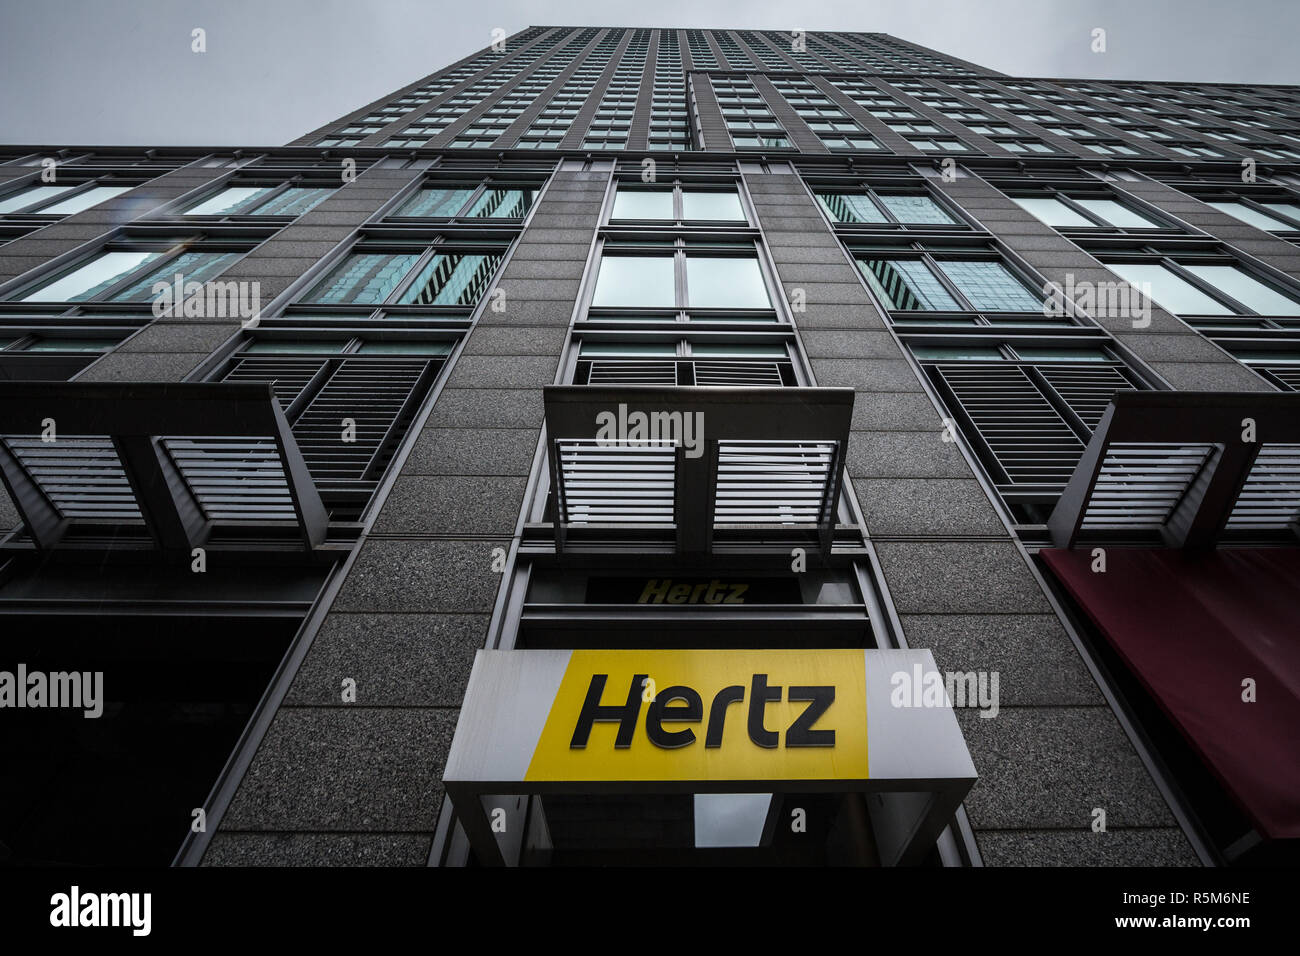 MONTREAL, CANADA - NOVEMBER 3, 2018: Logo of Hertz on their main office for Montreal, Quebec. Hertz is a car rental company from the USA spread worldw Stock Photo